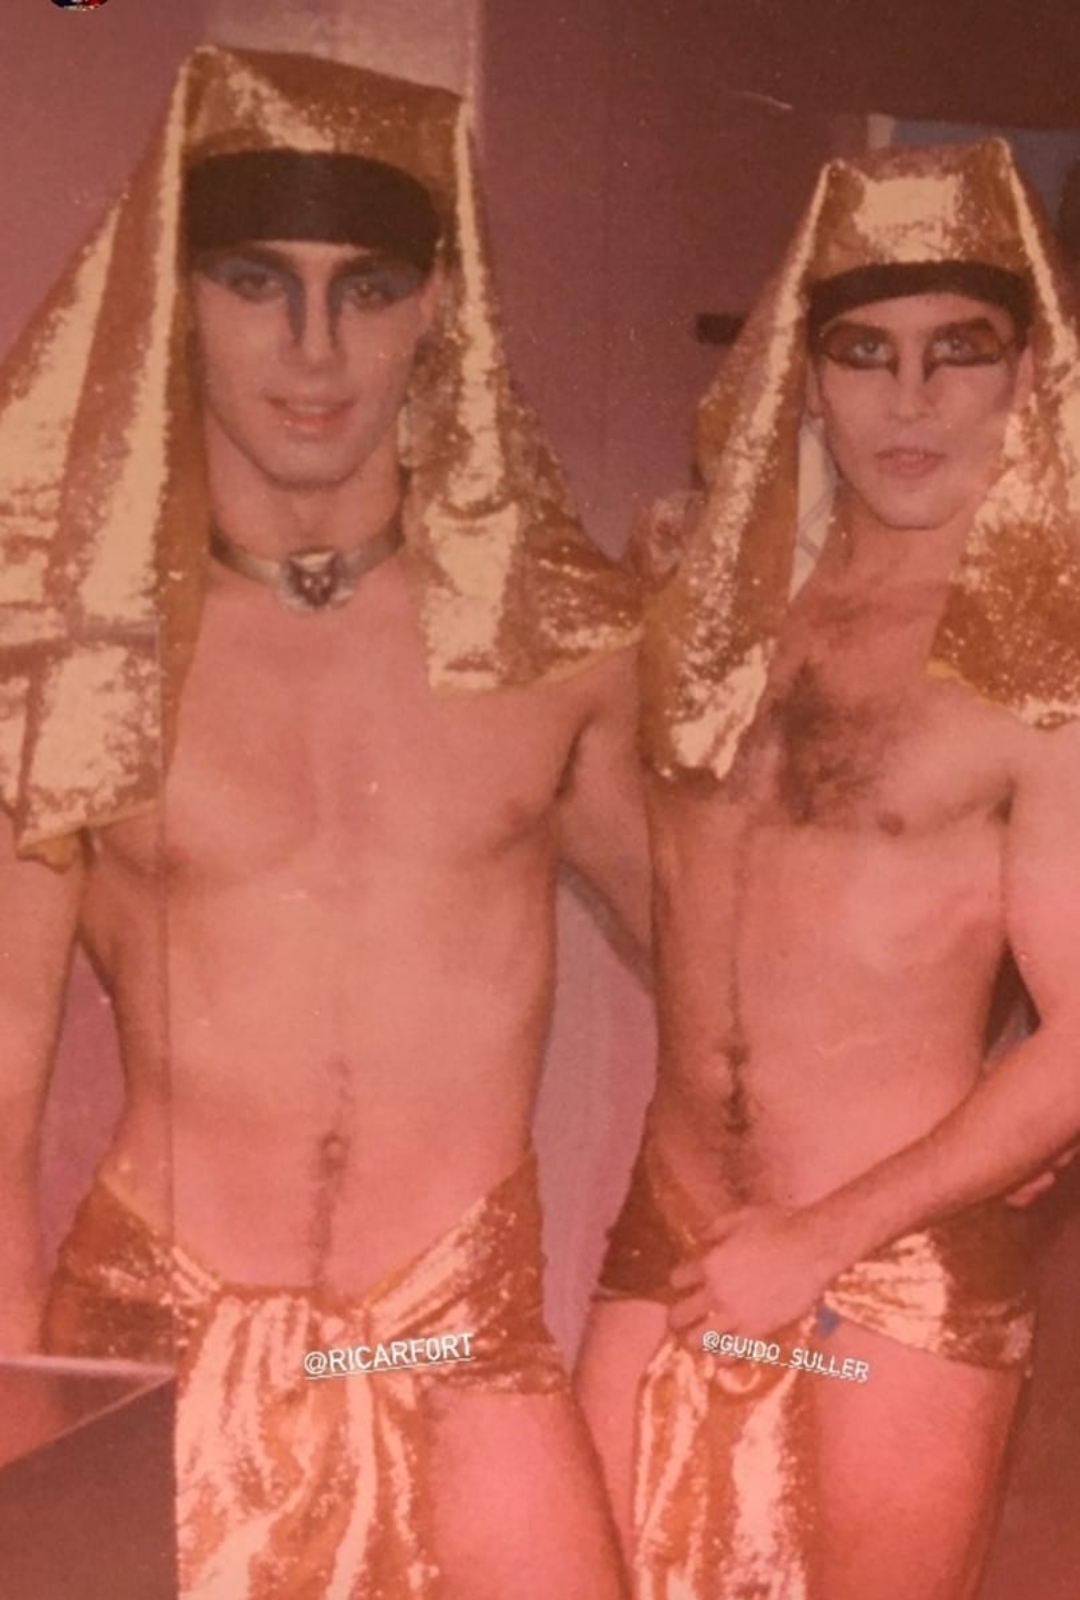 The unpublished photo of Ricardo Fort and Guido Süller during a costume party